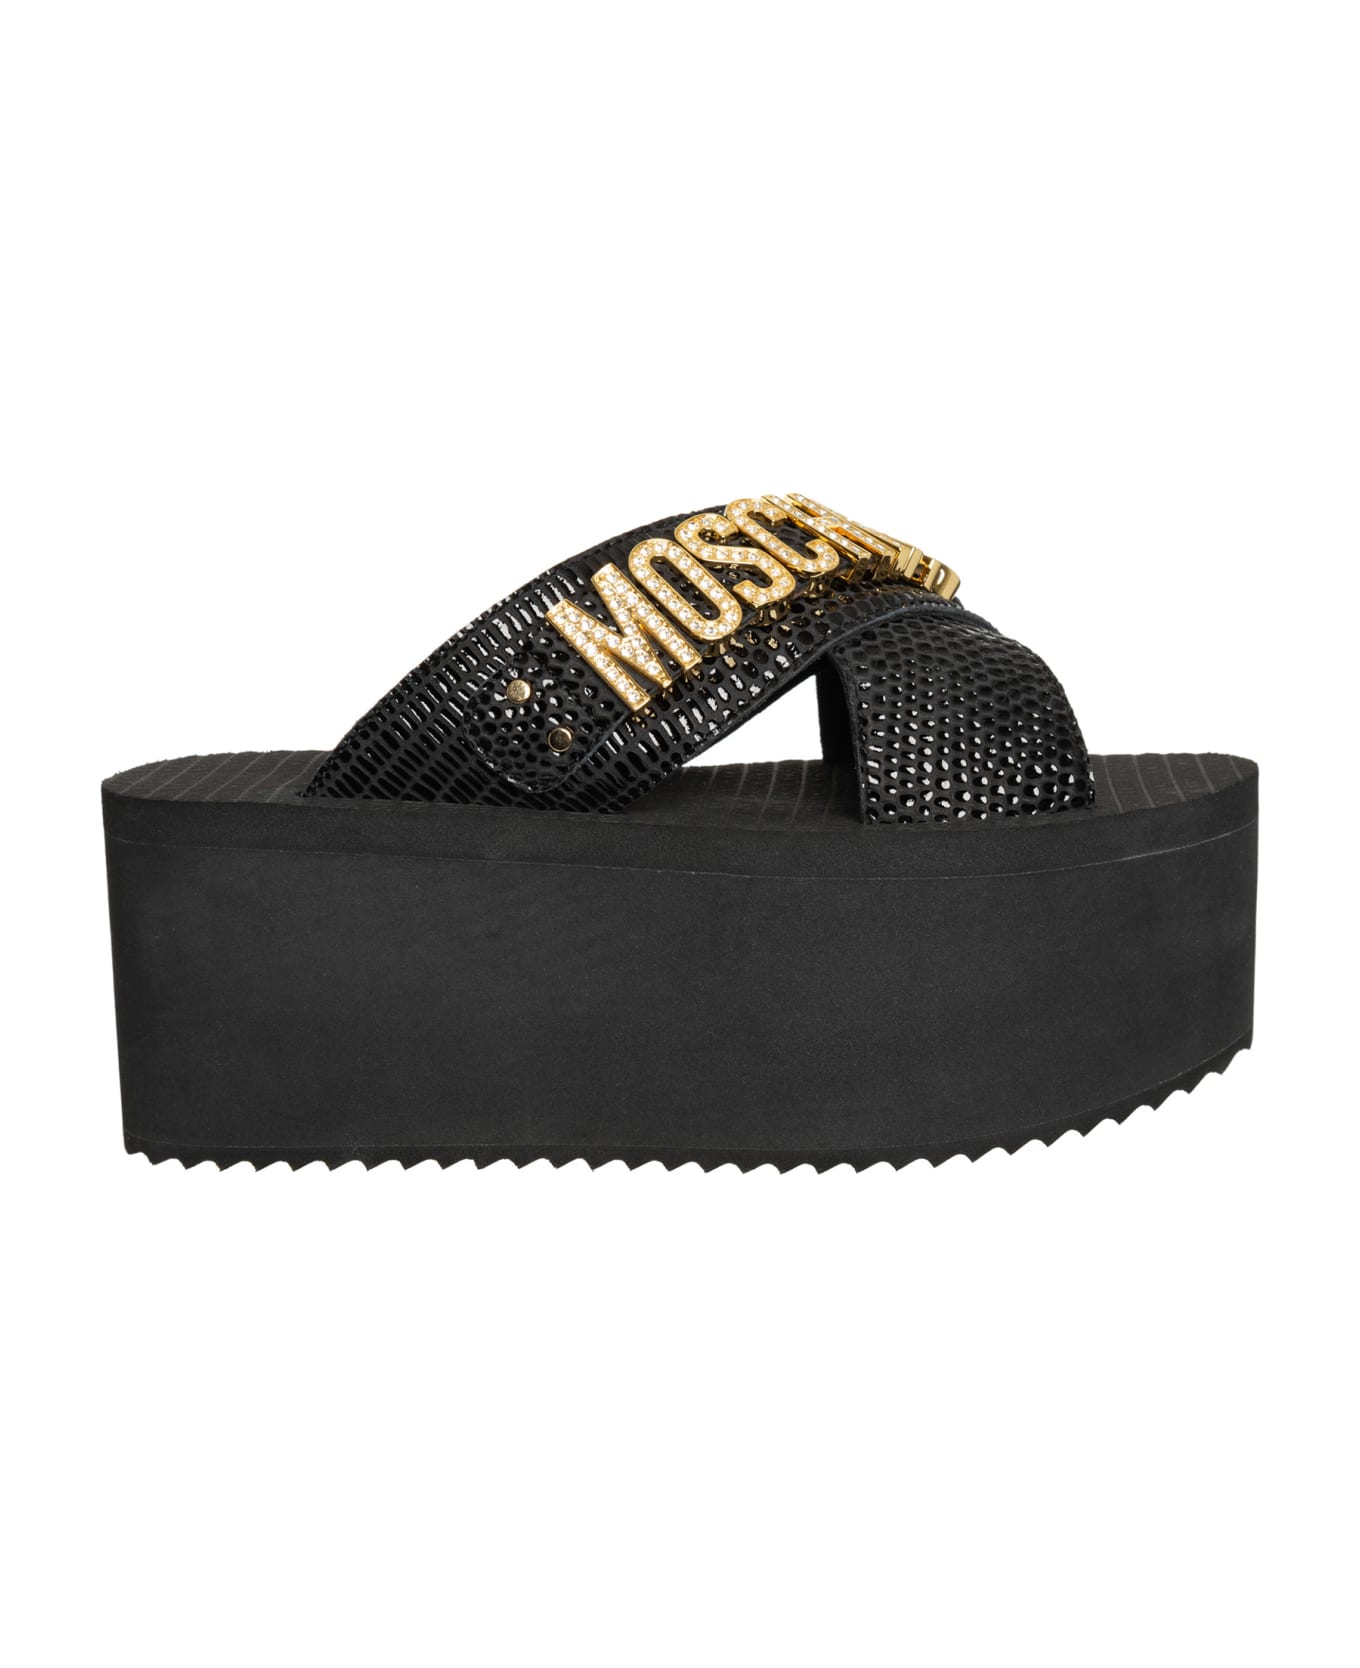 Moschino Leather Sandals - Black